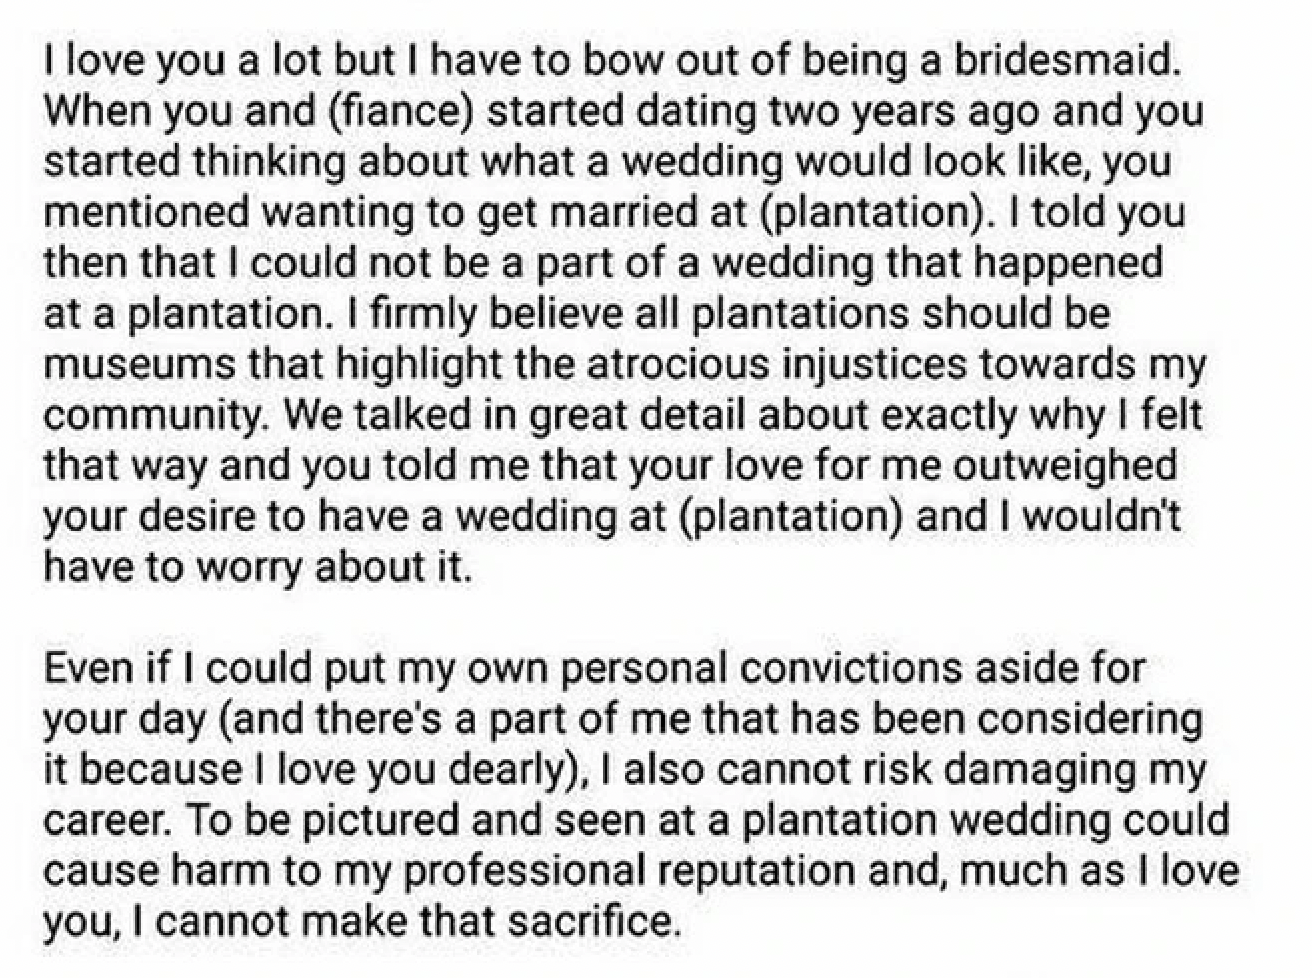 document - I love you a lot but I have to bow out of being a bridesmaid. When you and fiance started dating two years ago and you started thinking about what a wedding would look , you mentioned wanting to get married at plantation. I told you then that I